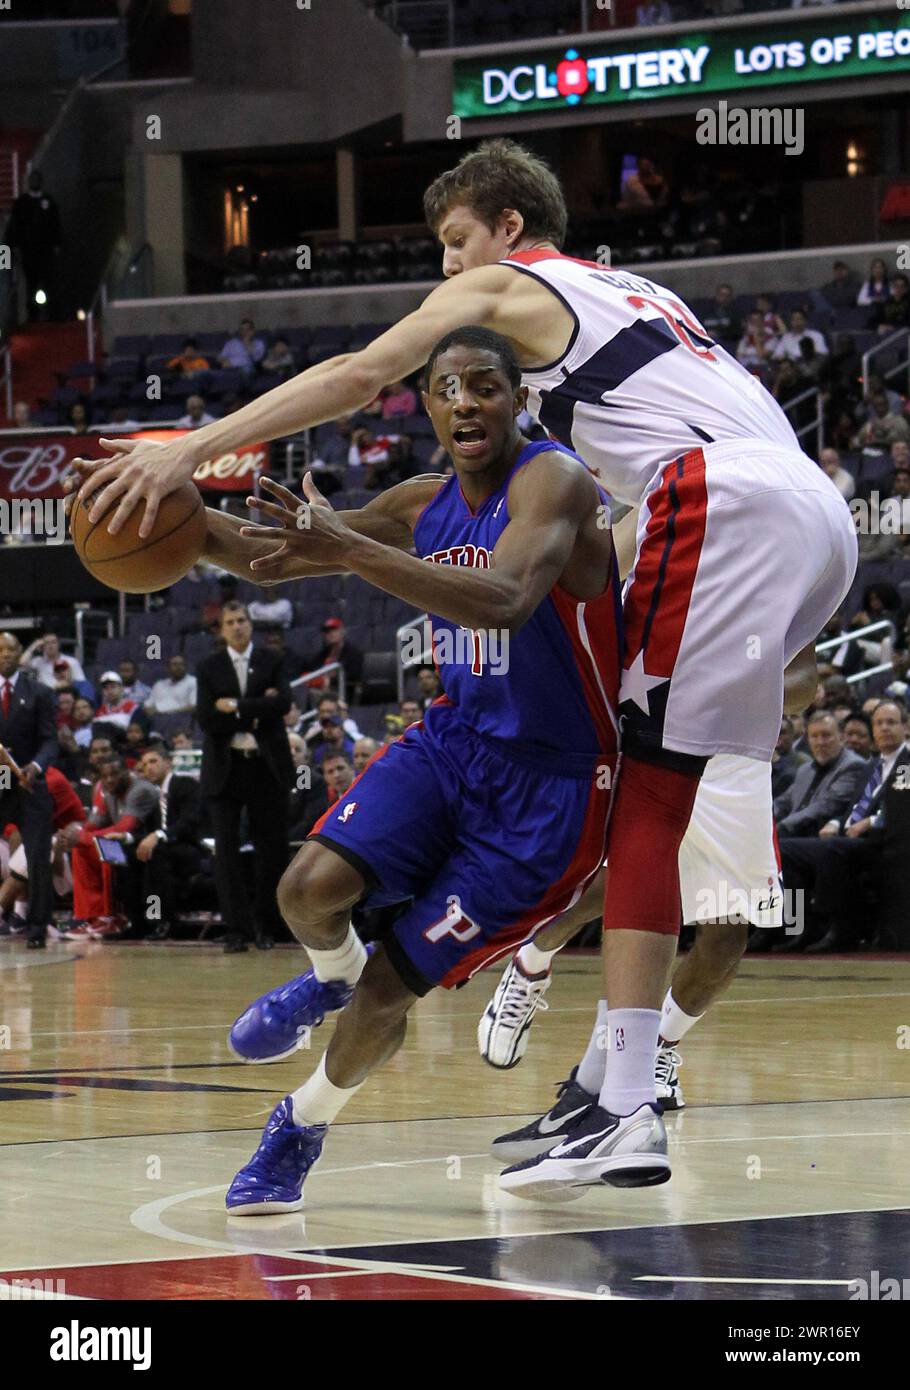 March 26 2012:  Jan Vesely (24) of the Washington Wizards reaches in t oget the ball from  Brandon Knight (7)  of the Detroit Pistons during an NBA game at Verizon Center, in Washington DC. Pistons won 79-77. Stock Photo